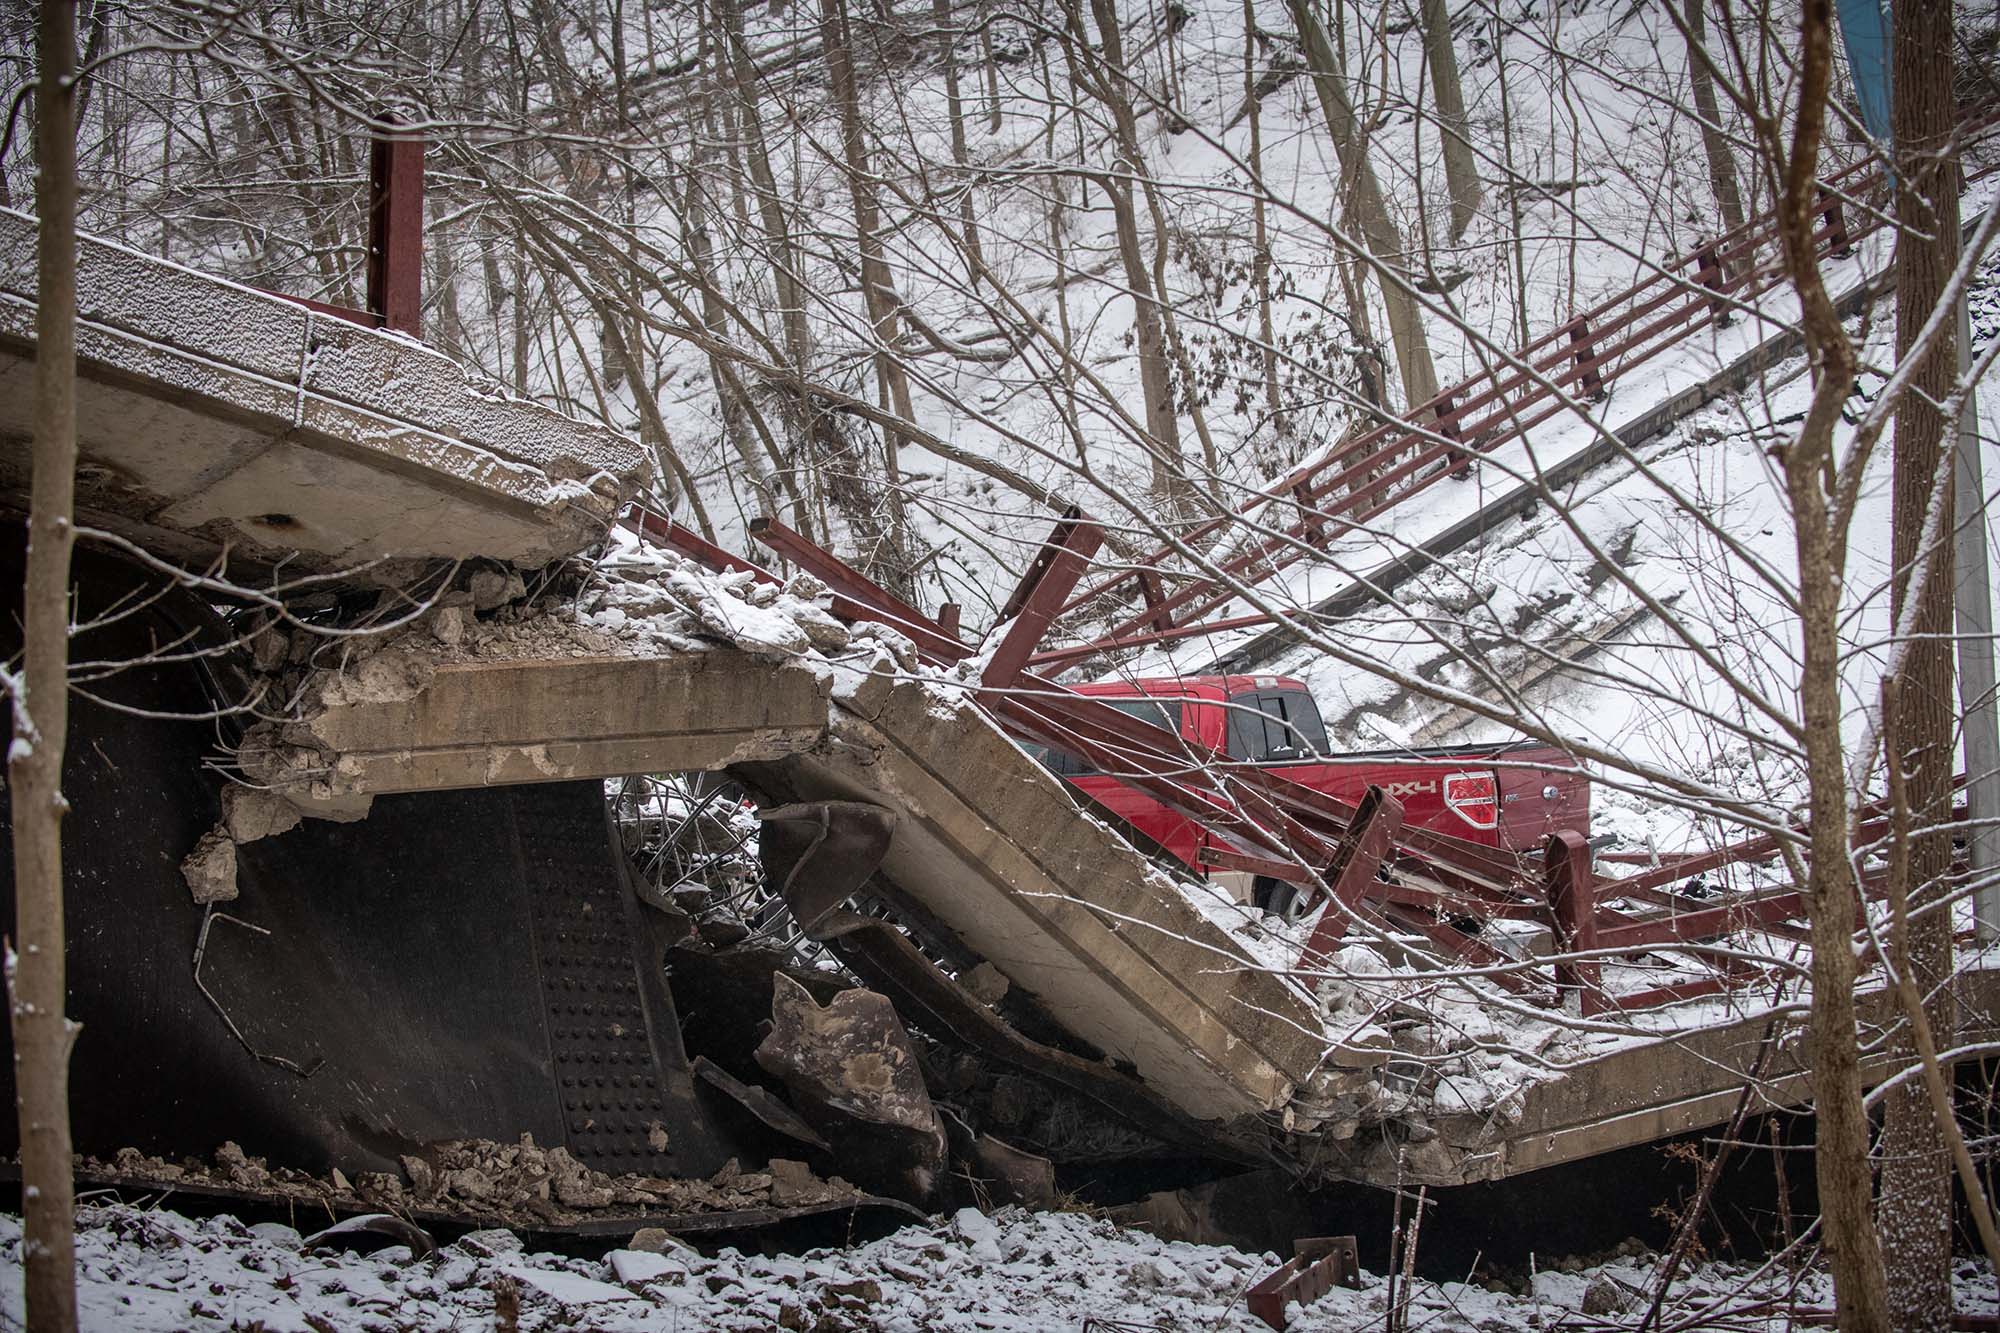 Hours and hours of collaboration: Fern Hollow Bridge Collapse ...